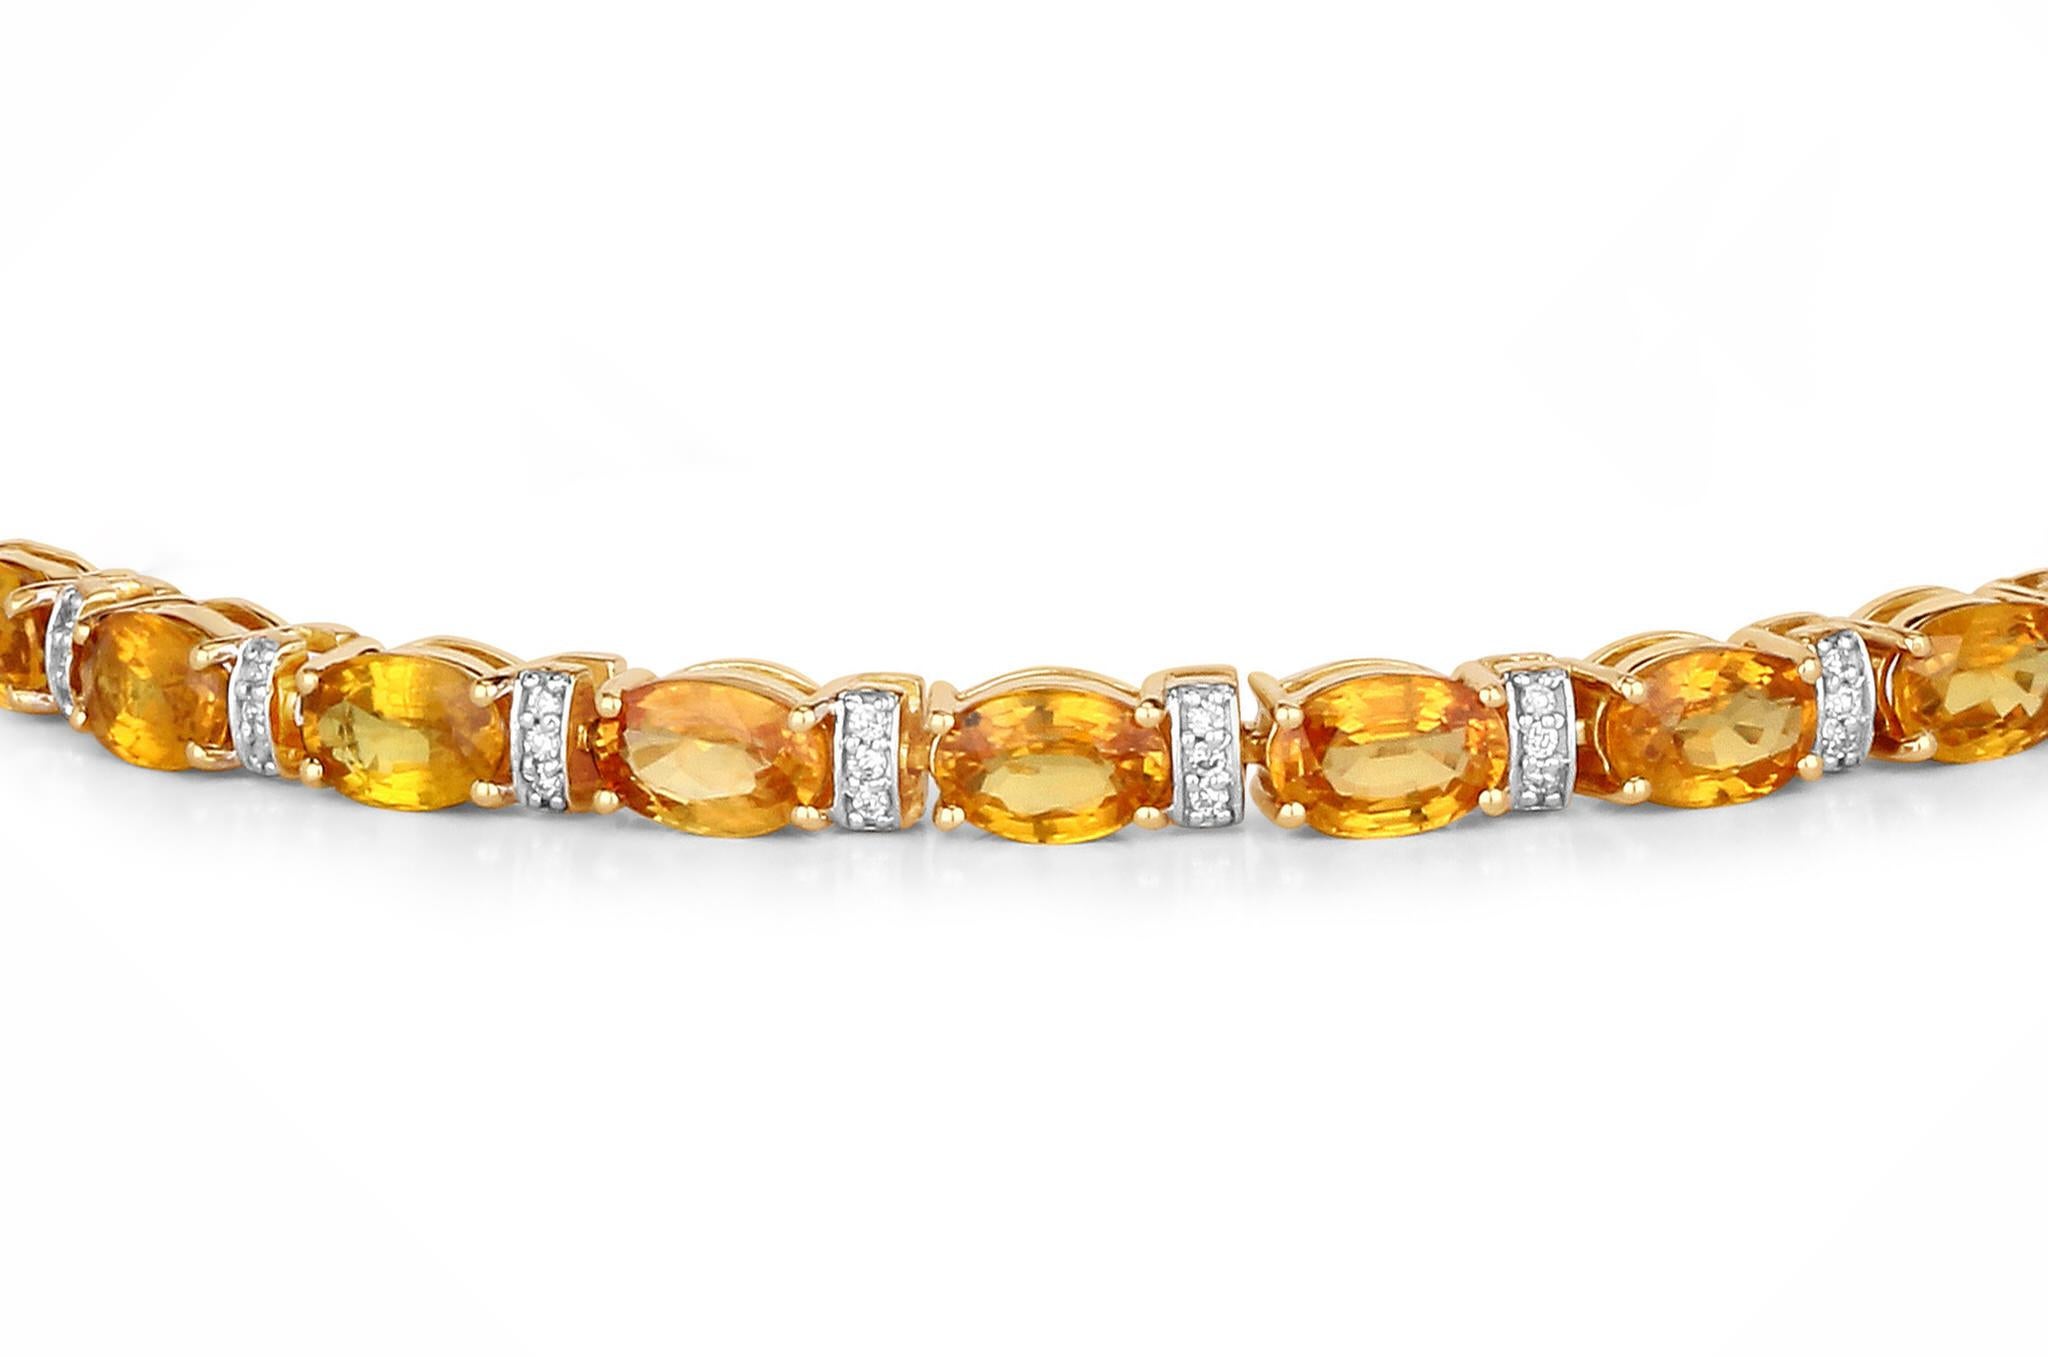 Natural Vivid Orange Sapphire and Diamond Tennis Bracelet 12.35 Carats 14k Gold In Excellent Condition For Sale In Laguna Niguel, CA